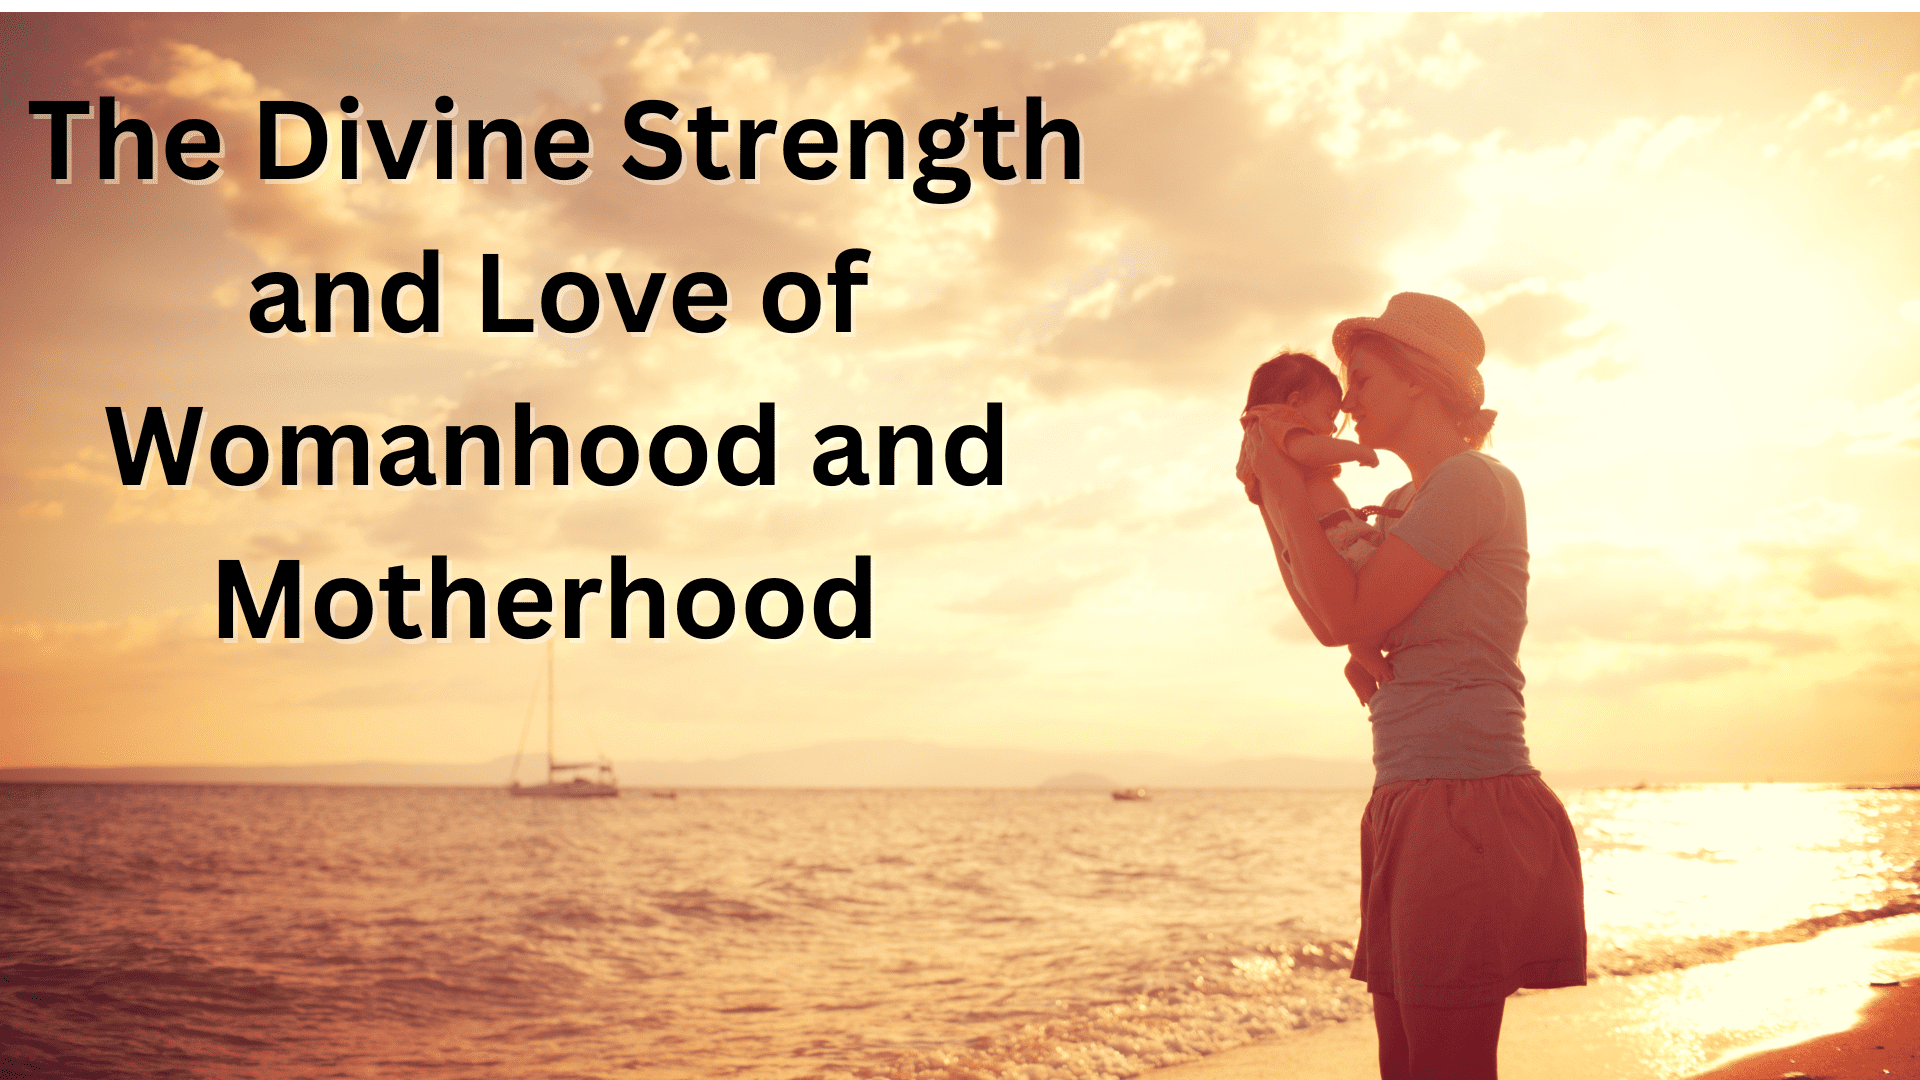 Featured image for “The Divine Strength and Love of Womanhood and Motherhood”